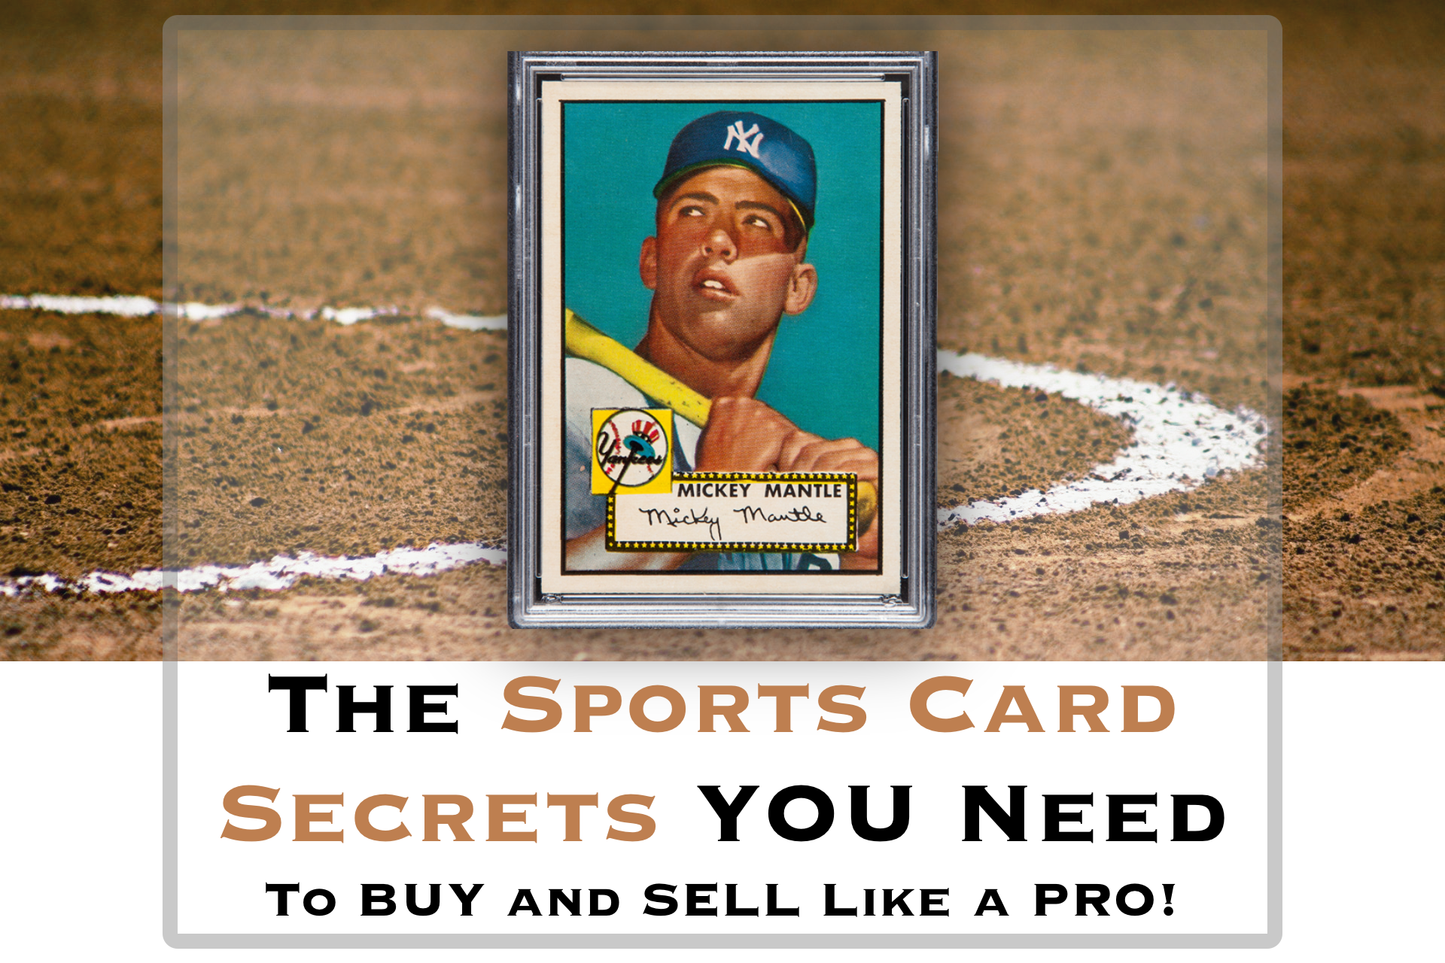 SALE: How To Invest in Sports Cards Like a PRO Course